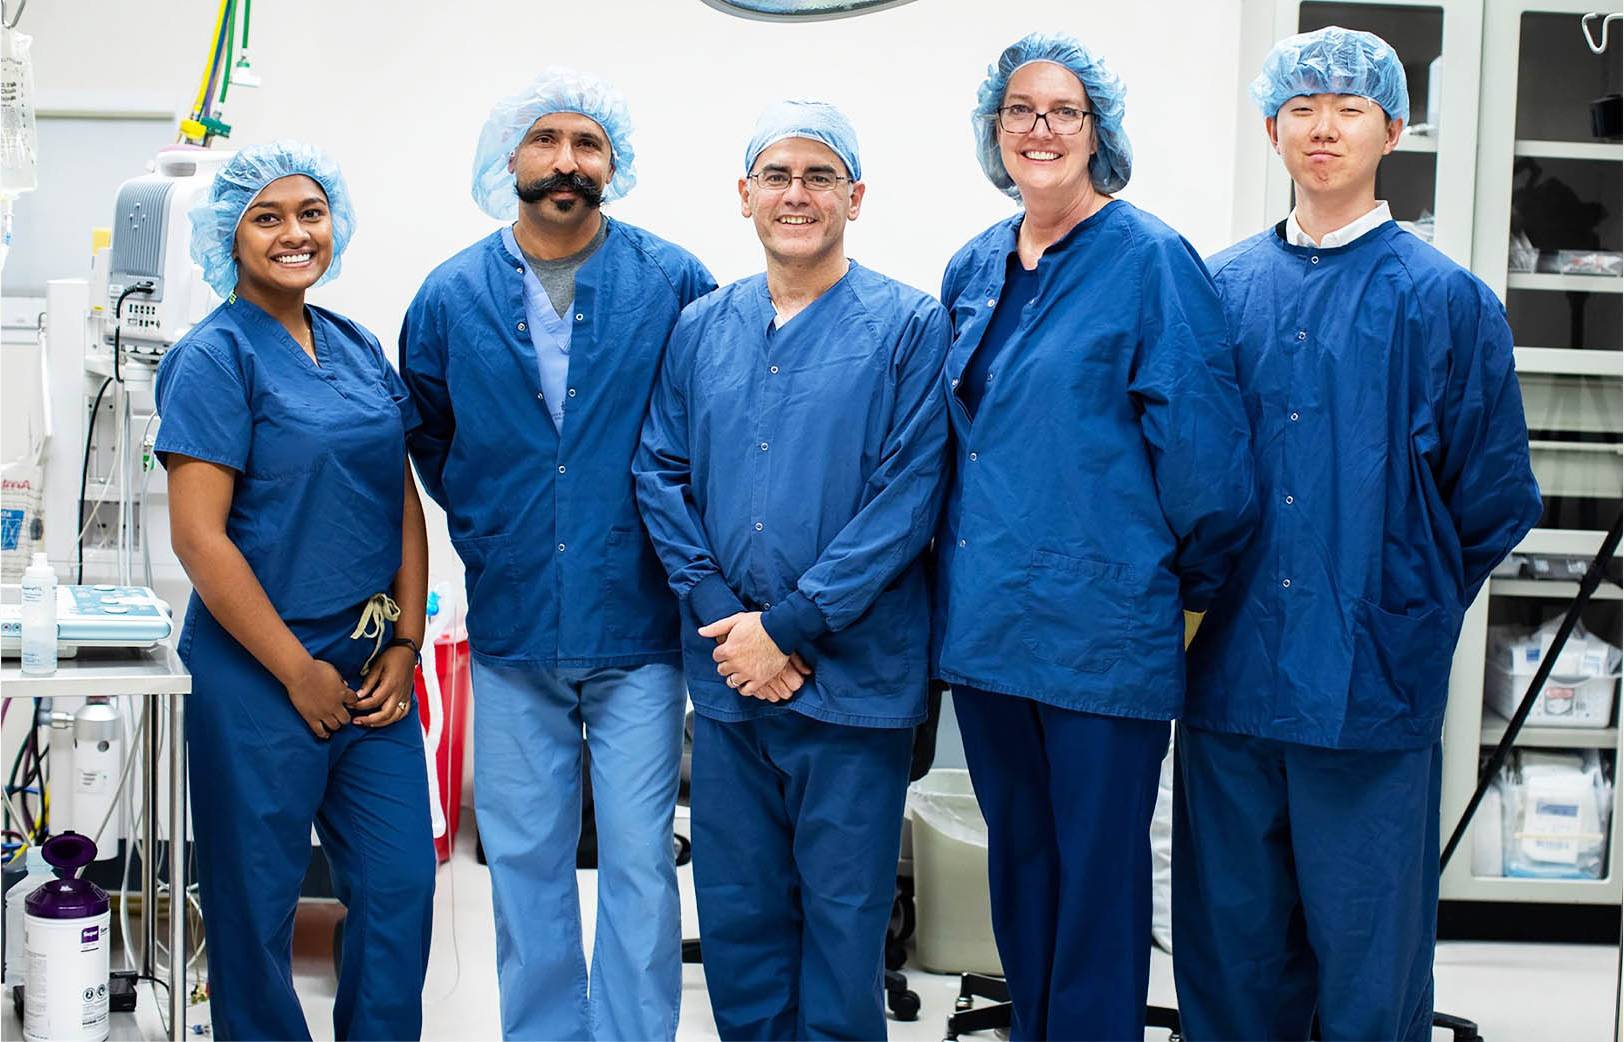 THYROID AND RFA CENTER FOR EXCELLENCE NOW PERFORMING RADIOFREQUENCY  ABLATION OF THE THYROID IN THE HOUSTON